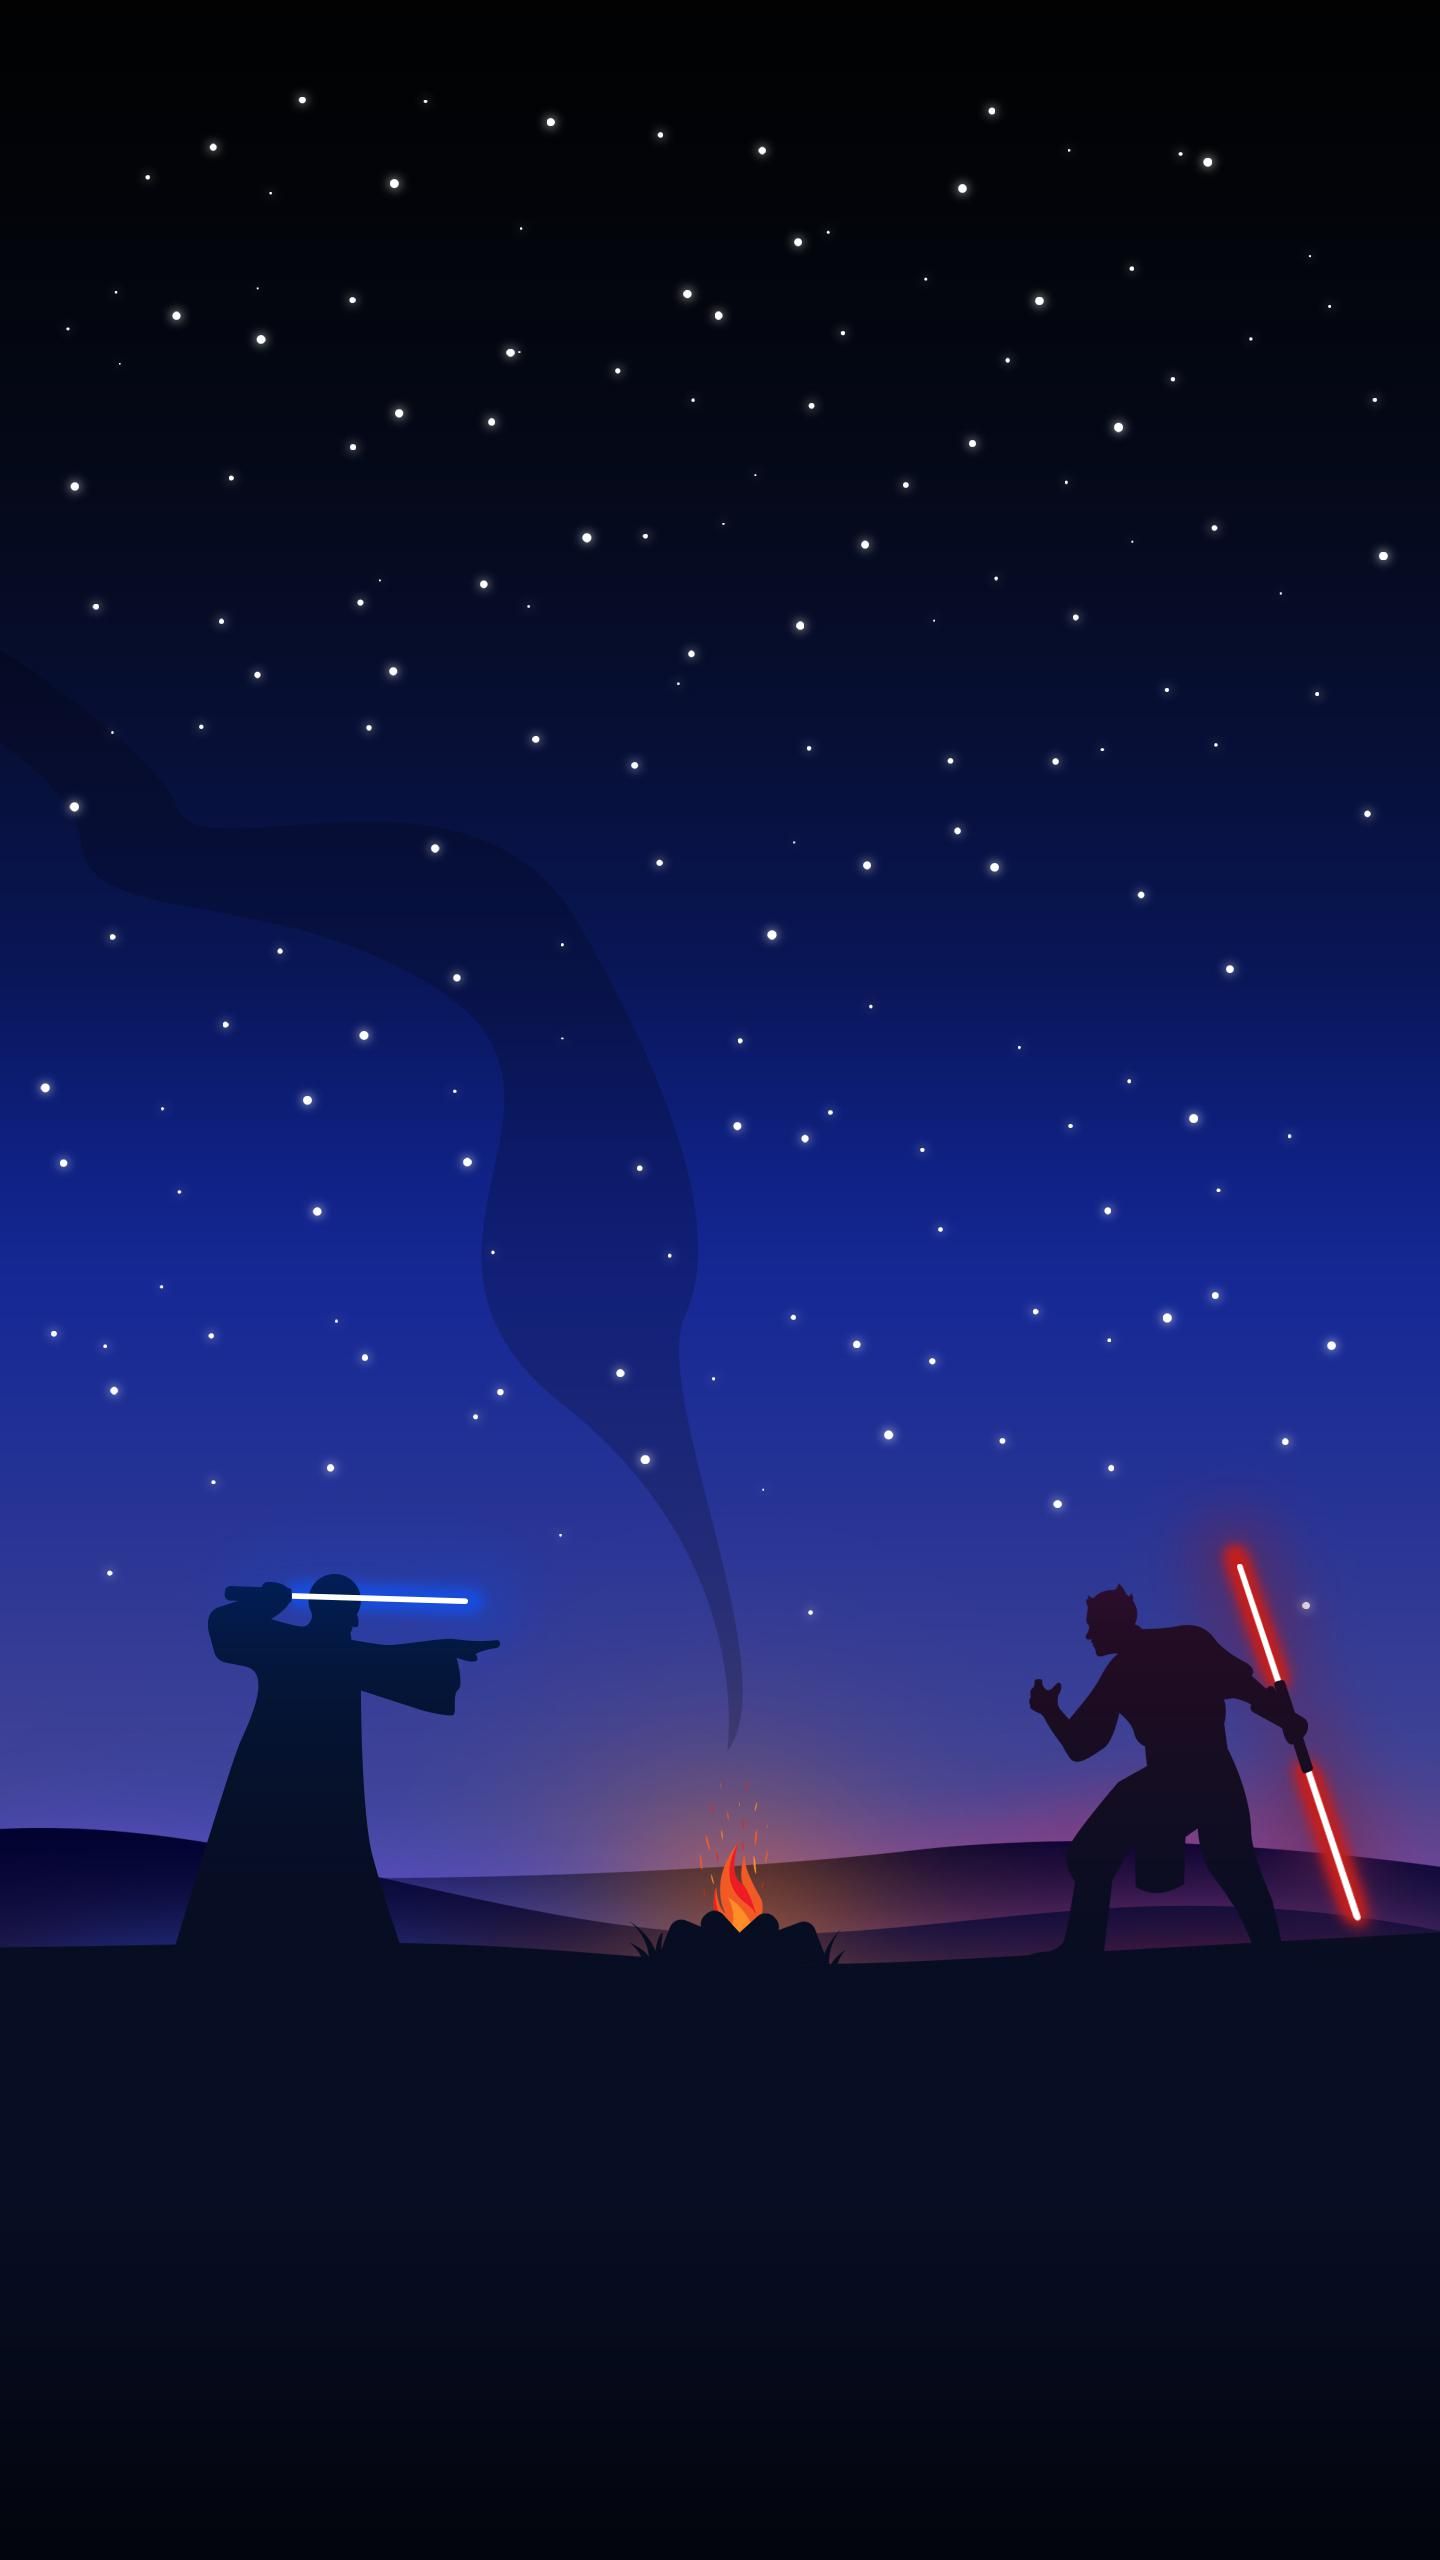 Star Wars Background Wallpaper Pictures